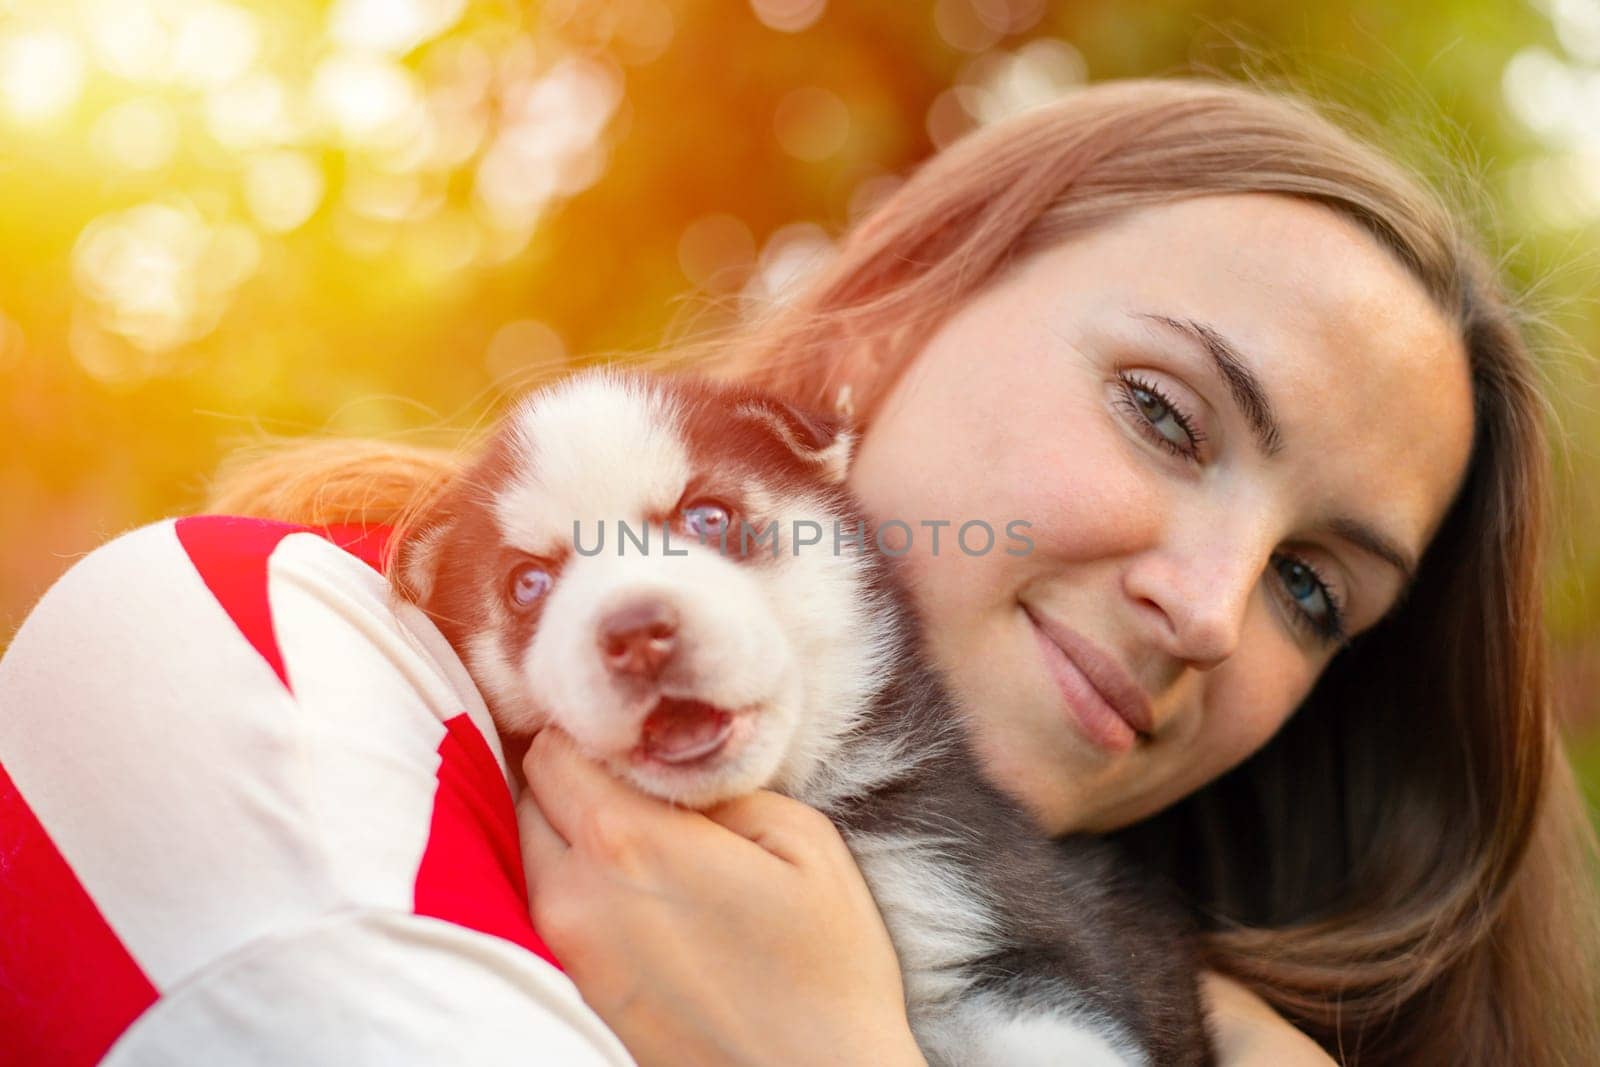 Woman in striped t-shirt tenderly hugs a small husky puppy in the park outdoors by andreyz